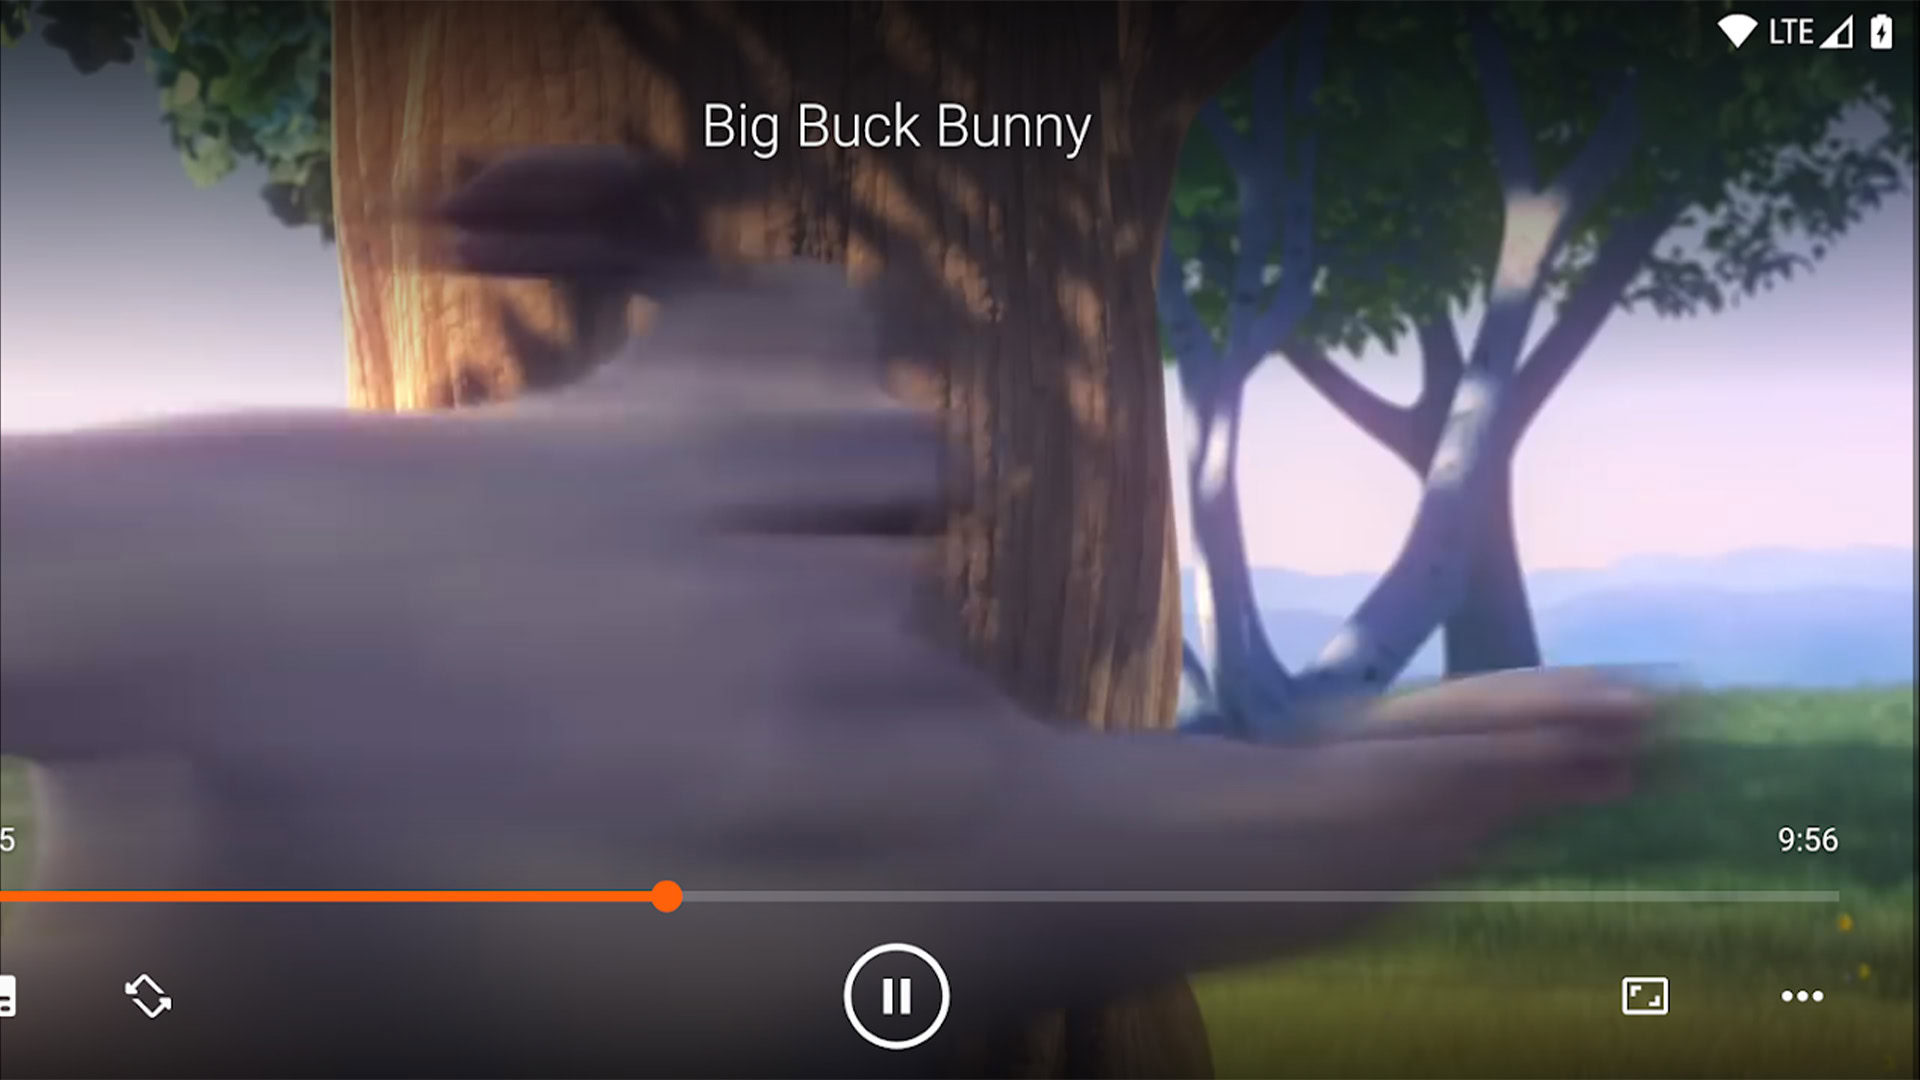 VLC for Android screenshot 2021